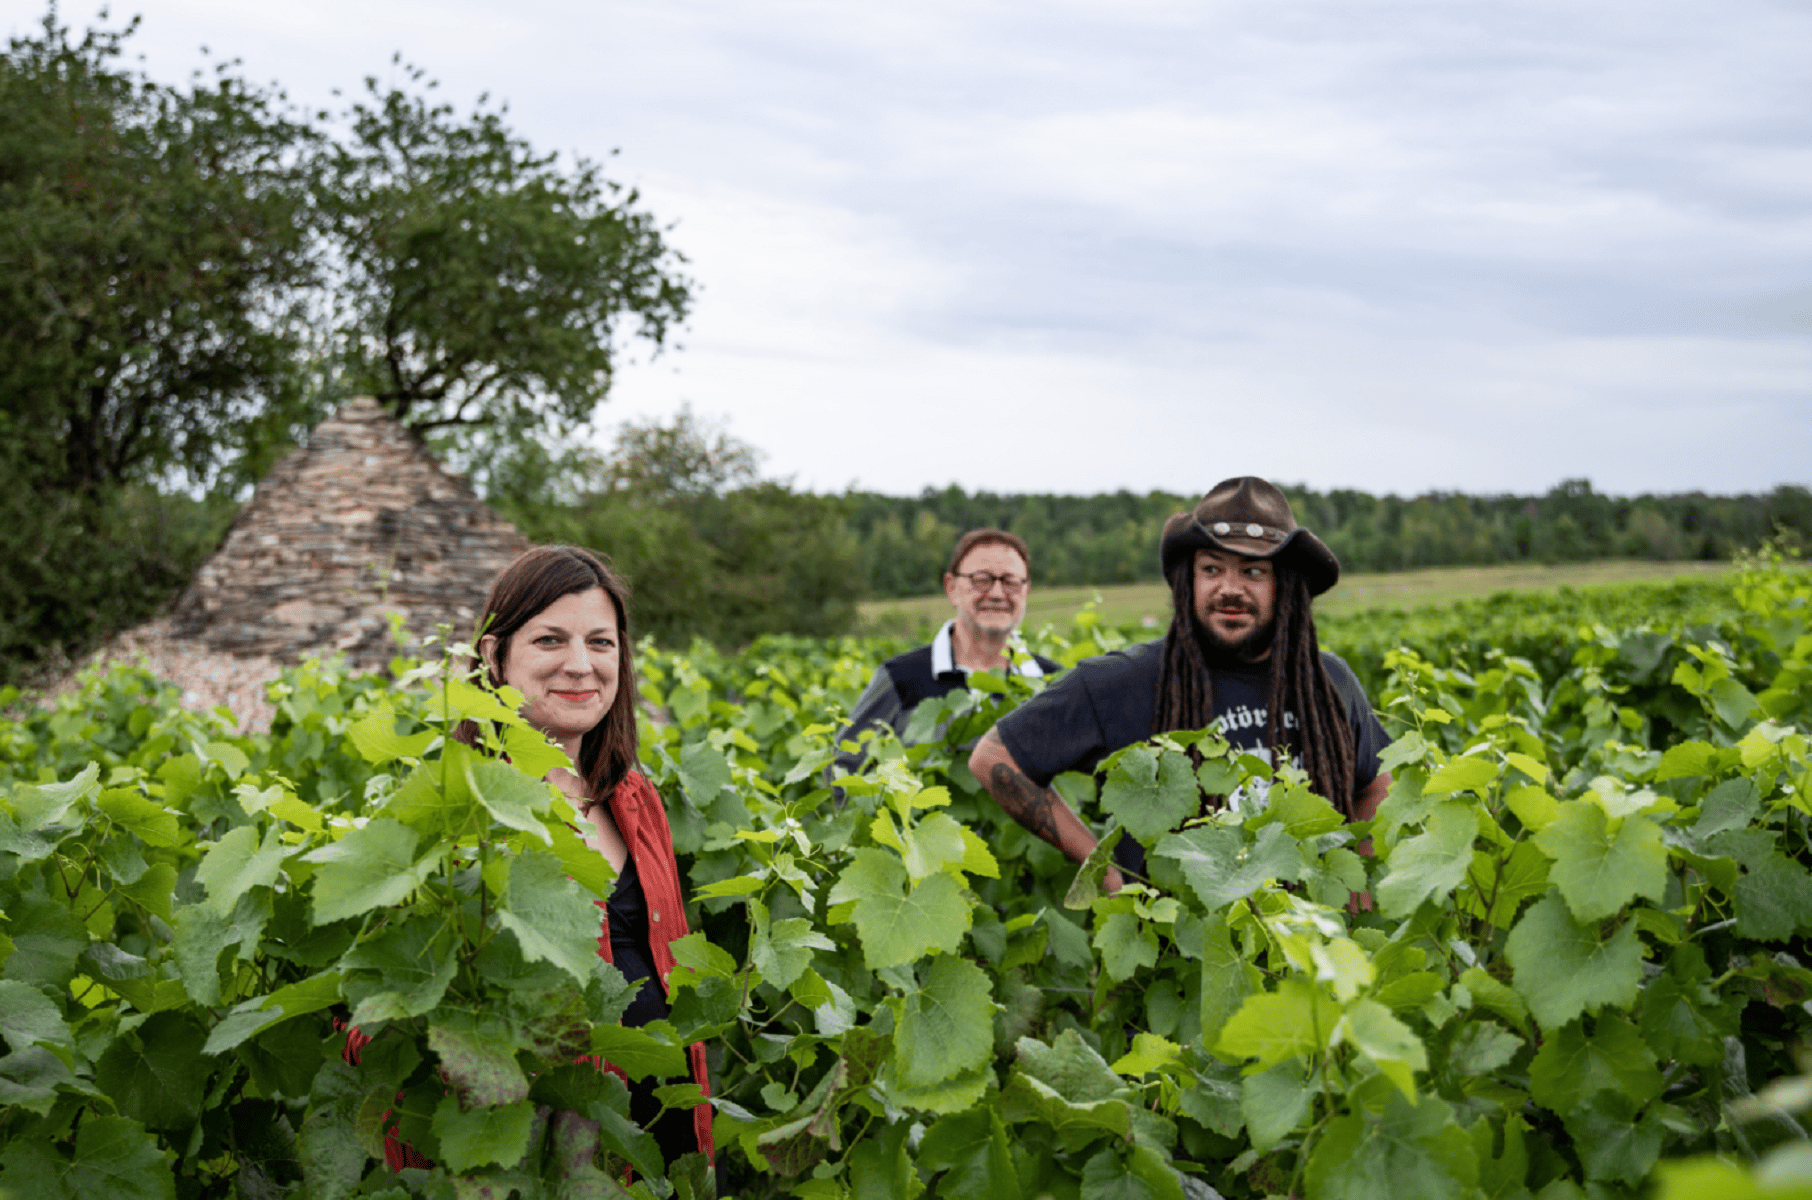 Pascal, Emilie and Simon Morel in the vineyard